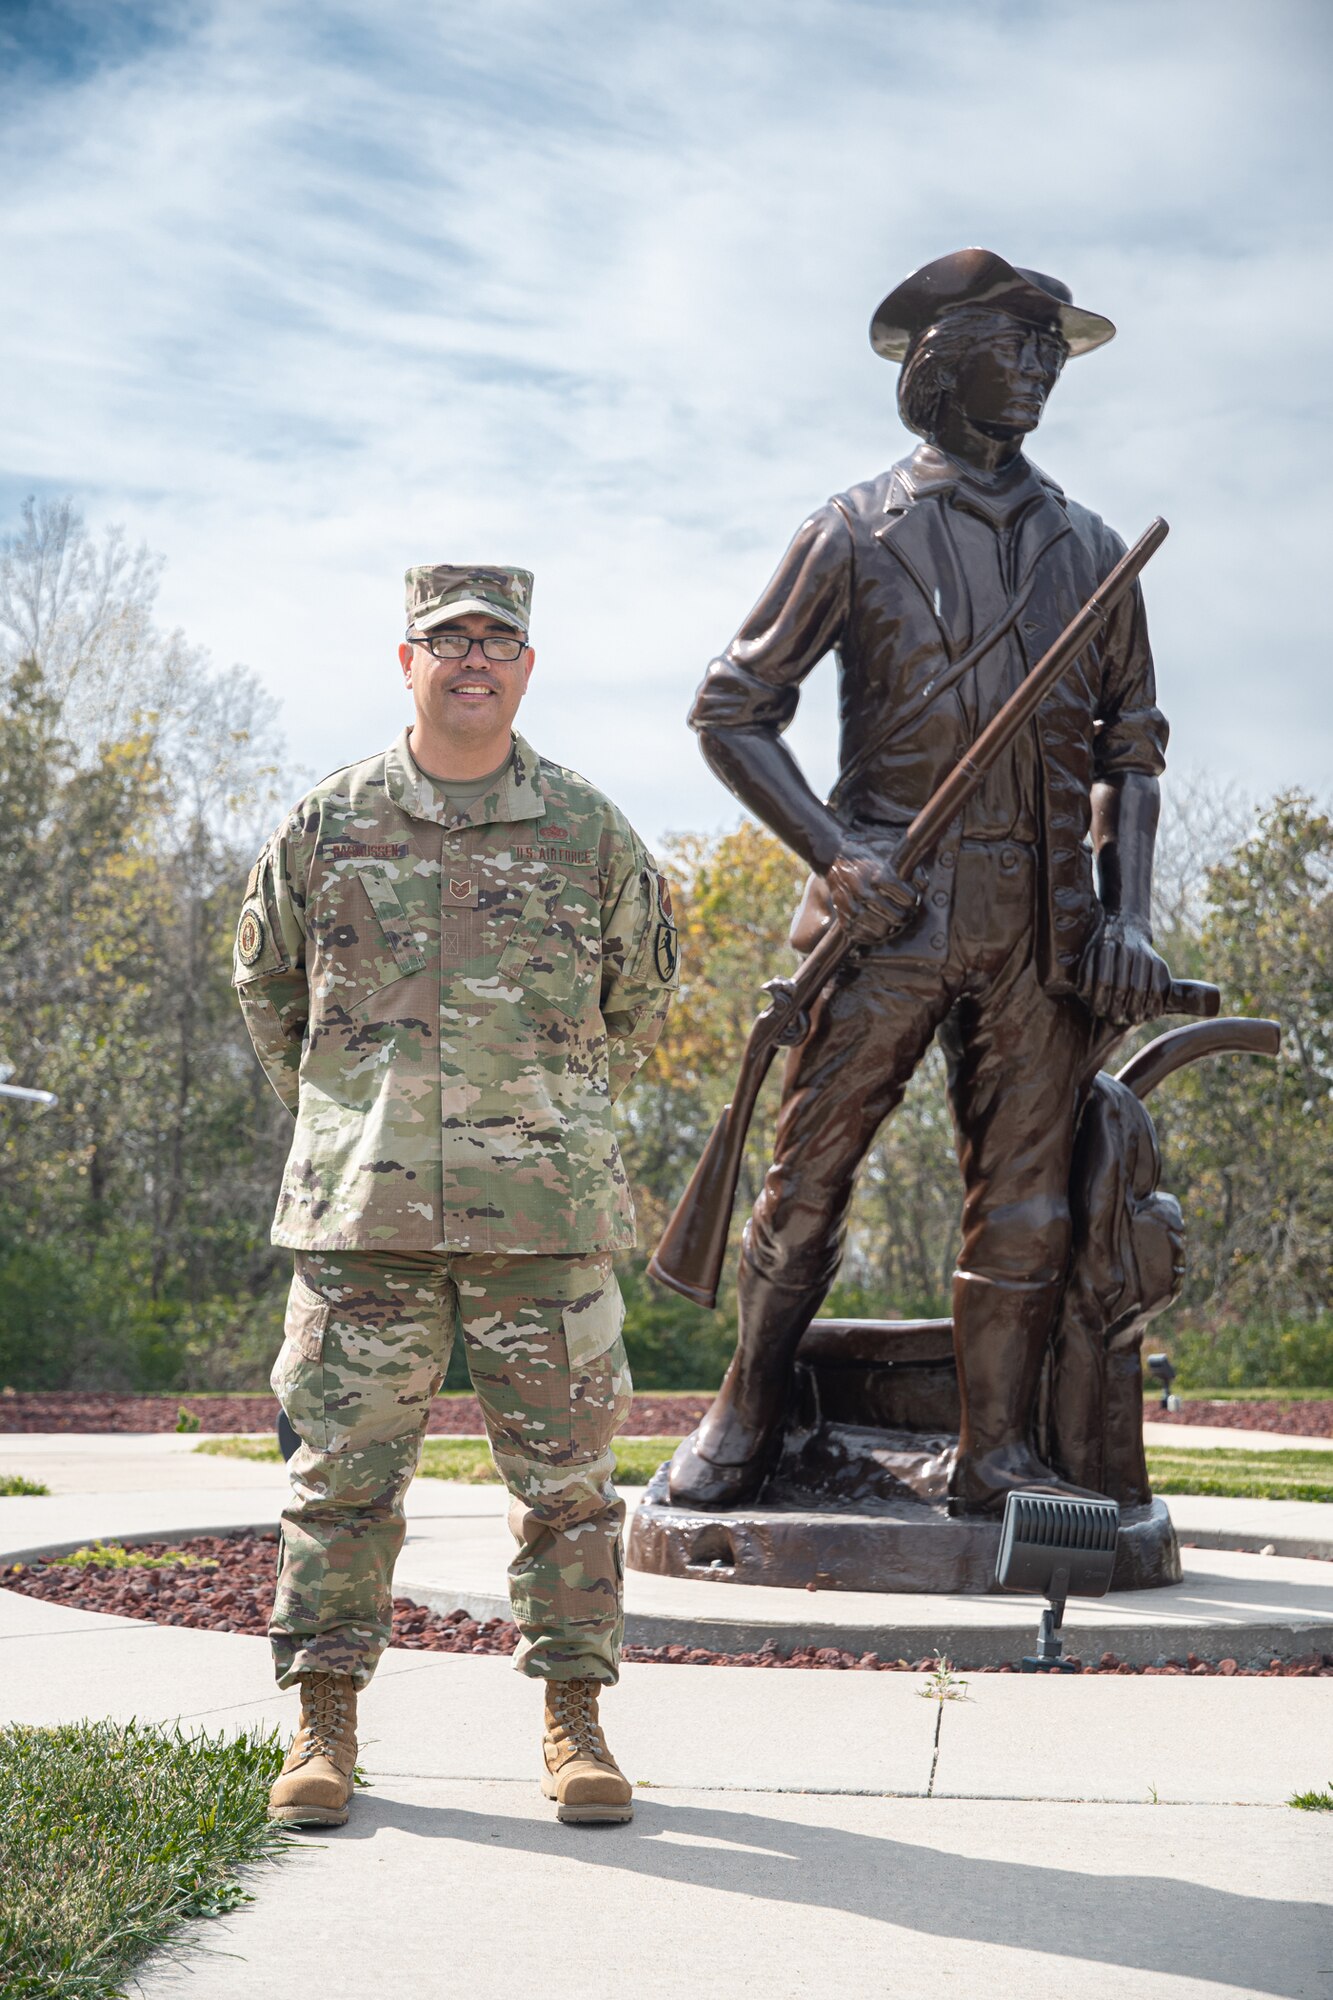 Tech. Sgt. Jarrett Rassmussen poses for a photo at the 131st Bomb Wing Heritage Park on Whiteman AFB, Missouri, Oct. 17, 2020. Rasmussen was recently named the Missouri Air National Guard's Recruiter of the Year for enlisting 49 new Airmen in Fiscal Year 2020. (U.S. Air National Guard photo by Airman 1st Class Joseph Geldermann)